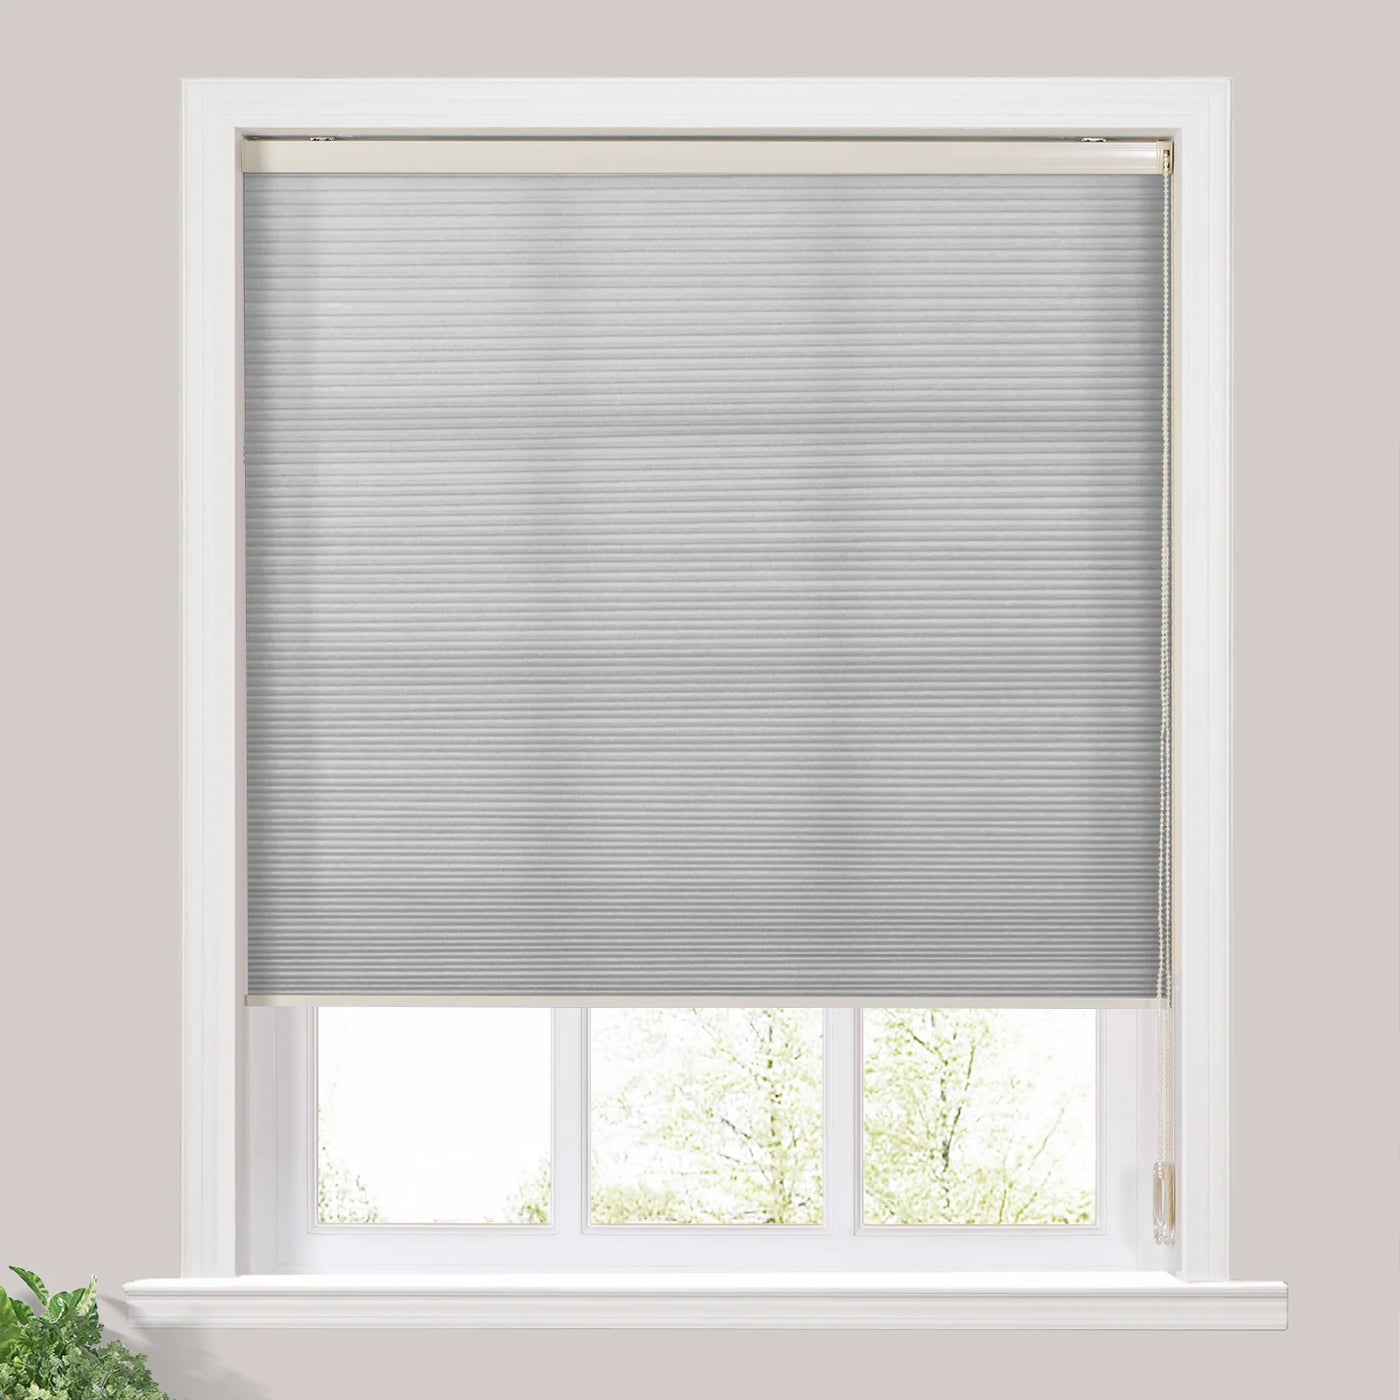 Priya Light Filtering Cellular Shades Cord Lift TWOPAGES